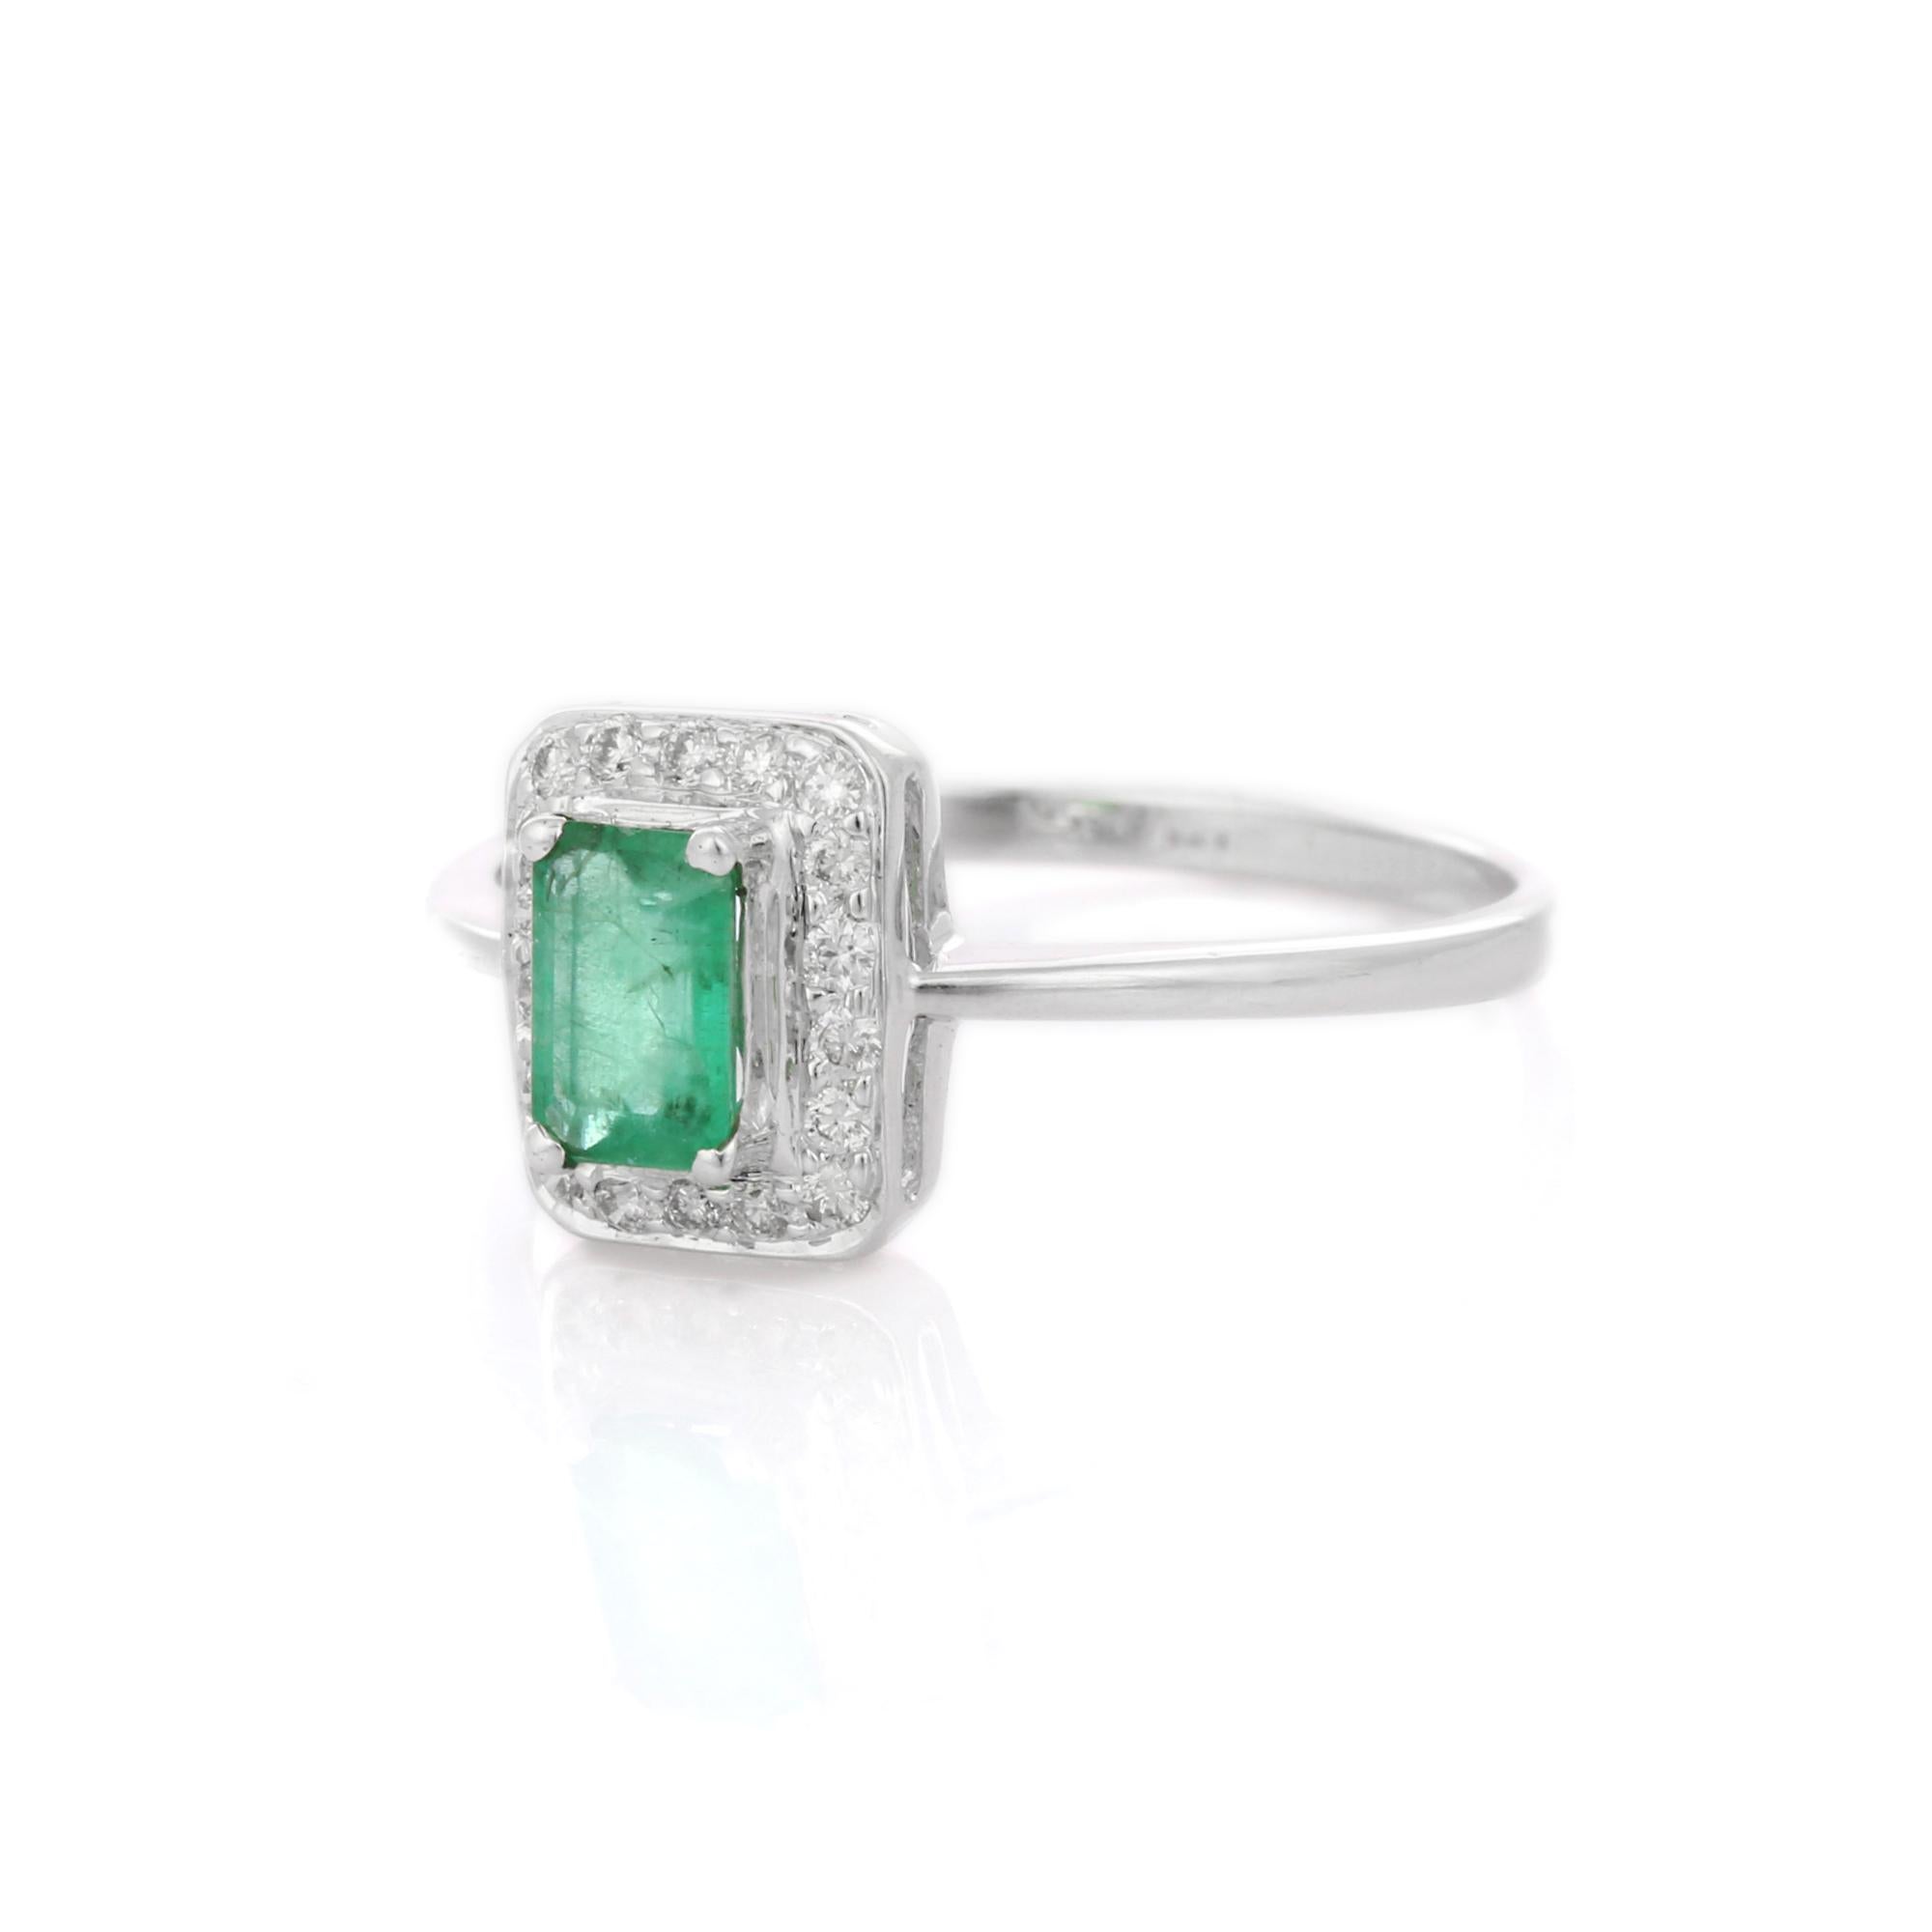 For Sale:  Octagon Cut Emerald Enclosed with Diamonds Engagement Ring in 18K White Gold 3